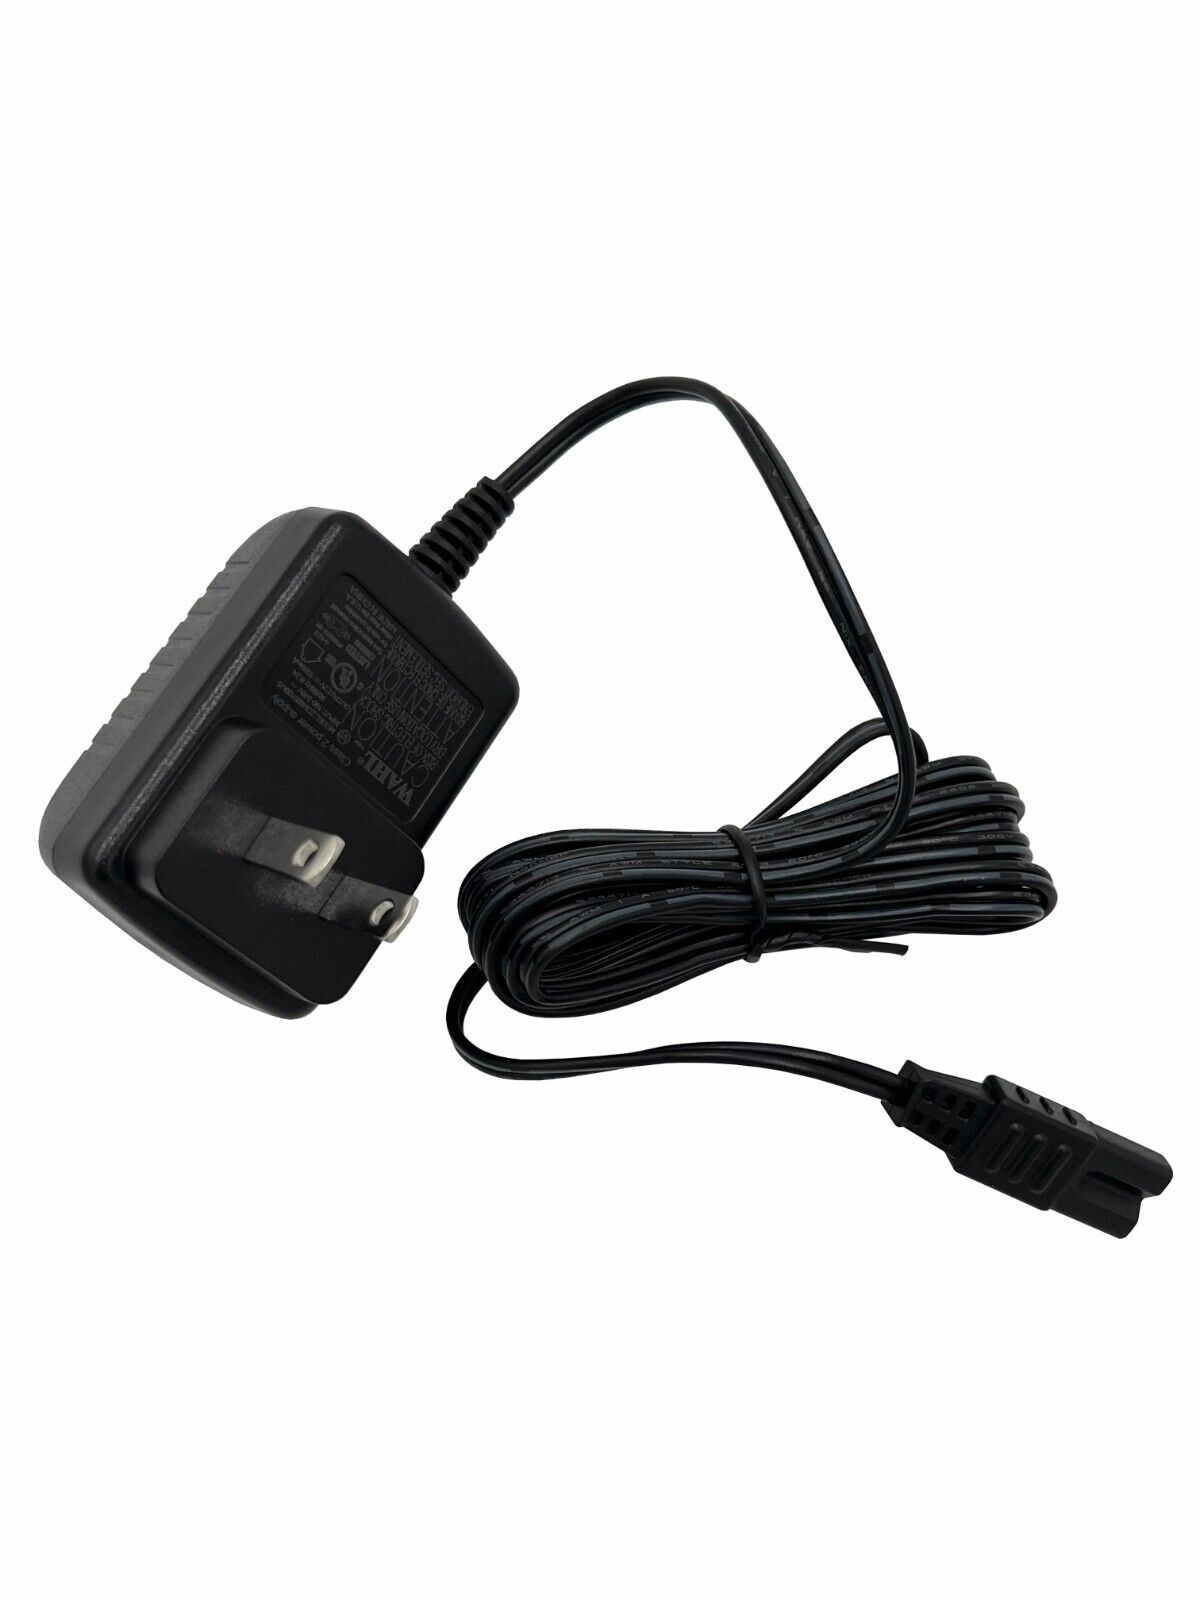 Wahl AC Adapter Charger For Custom Shave 7061-500, 7061-900, 7367-200, 7367-300 Compatible Brand For Wahl Brand Wahl Ty